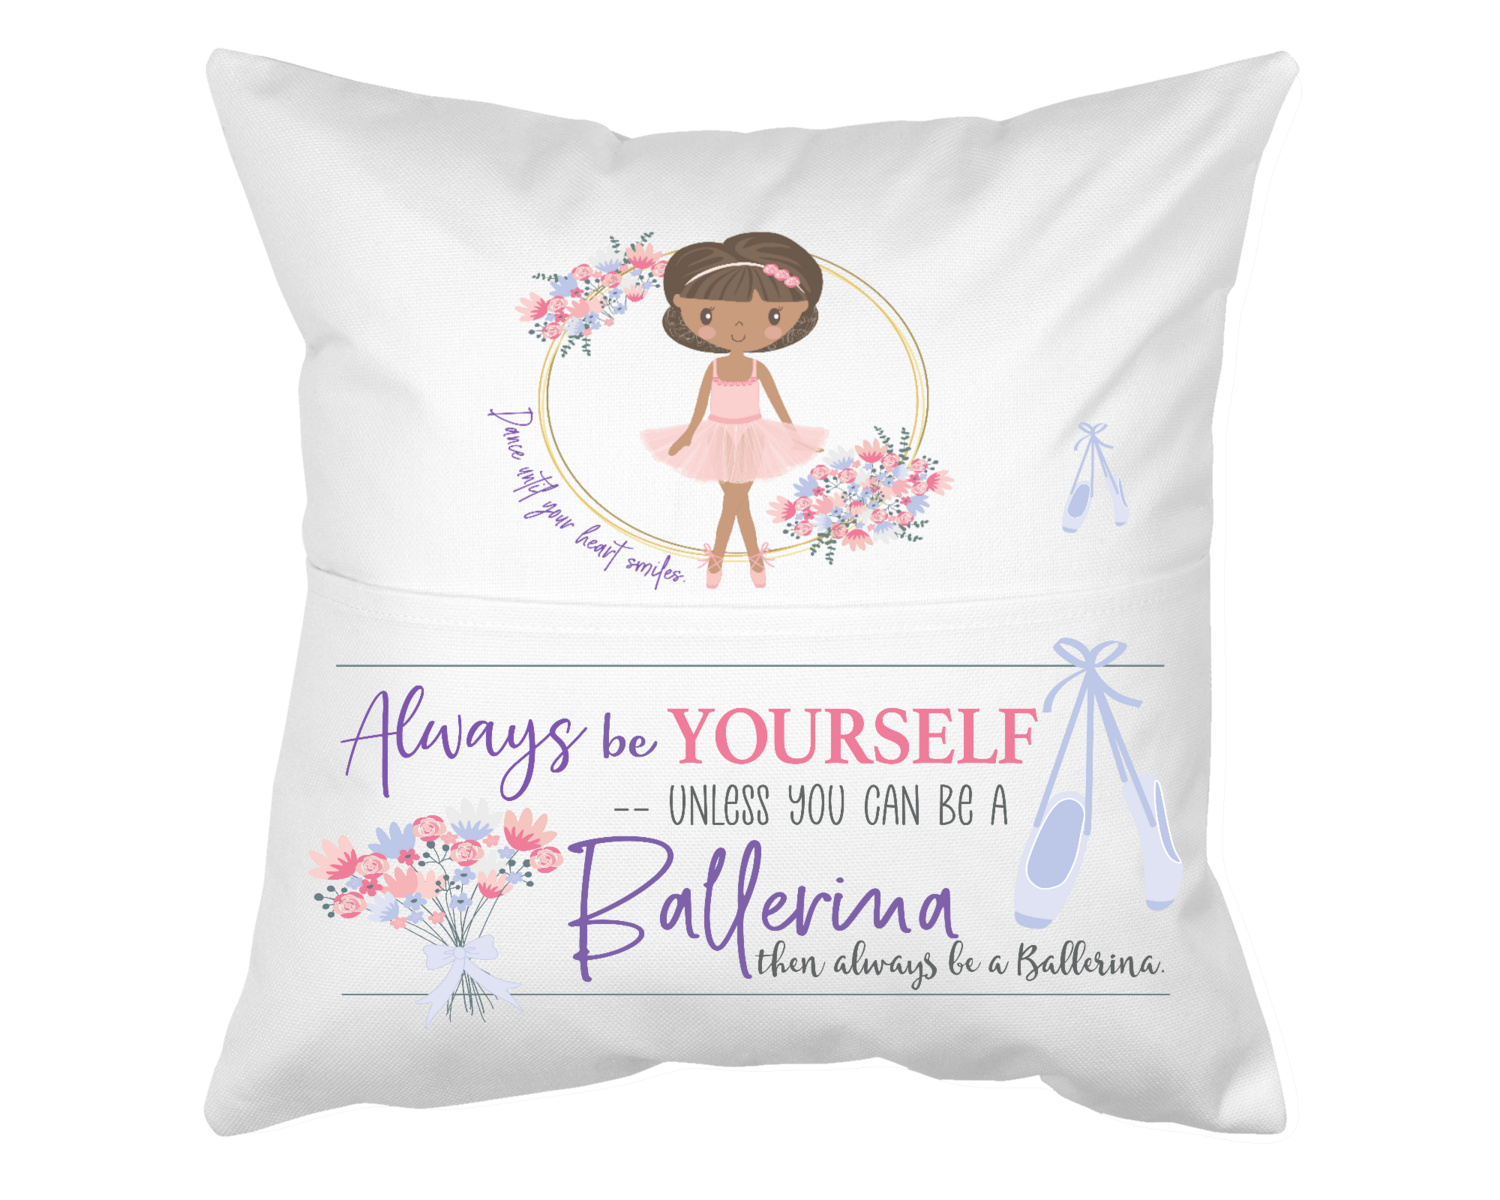 Pillow With Pocket: BALLERINA ...ALWAYS BE YOURSELF UNLESS YOU CAN BE A BALLERINA, THEN ALWAYS BE A BALLERINA